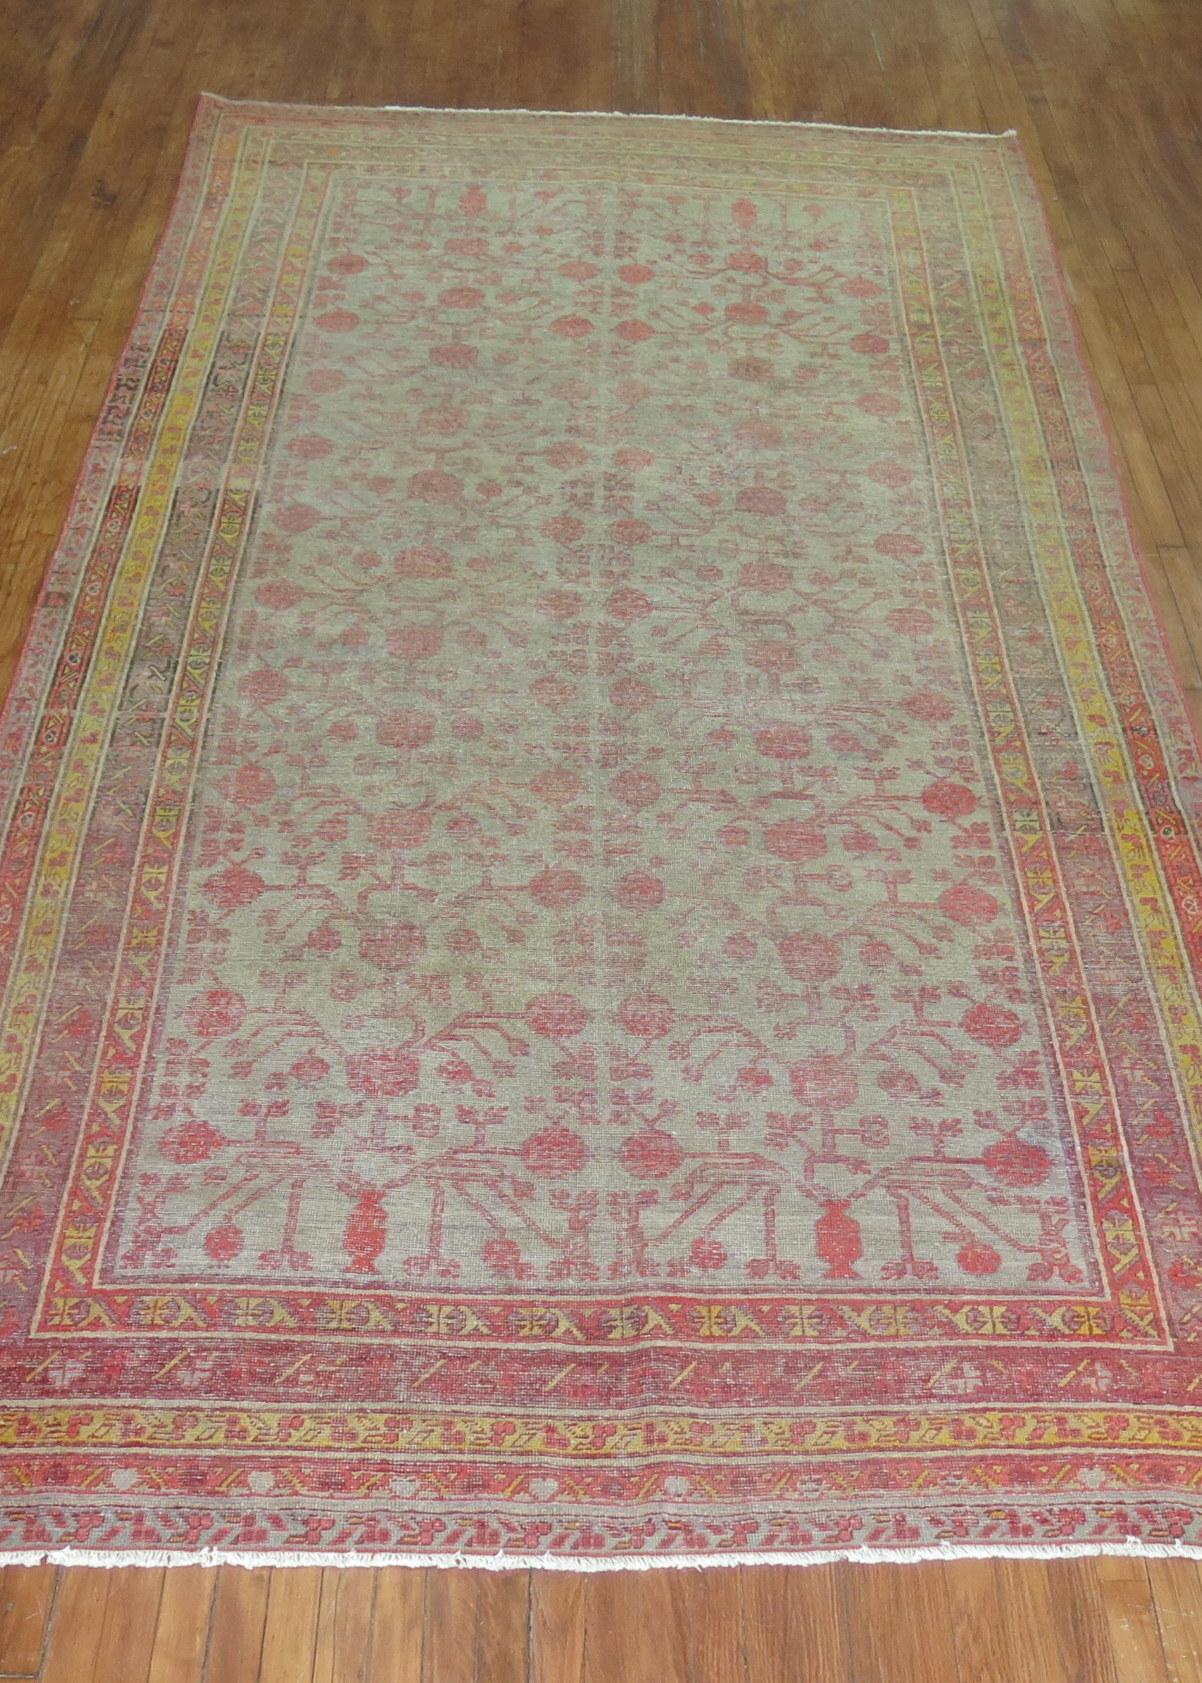 A worn early 20th century Khotan gallery rug. Gray ground, soft red accent pomegranates throughout. accents in yellow and brown

circa 1910, measures: 6'4